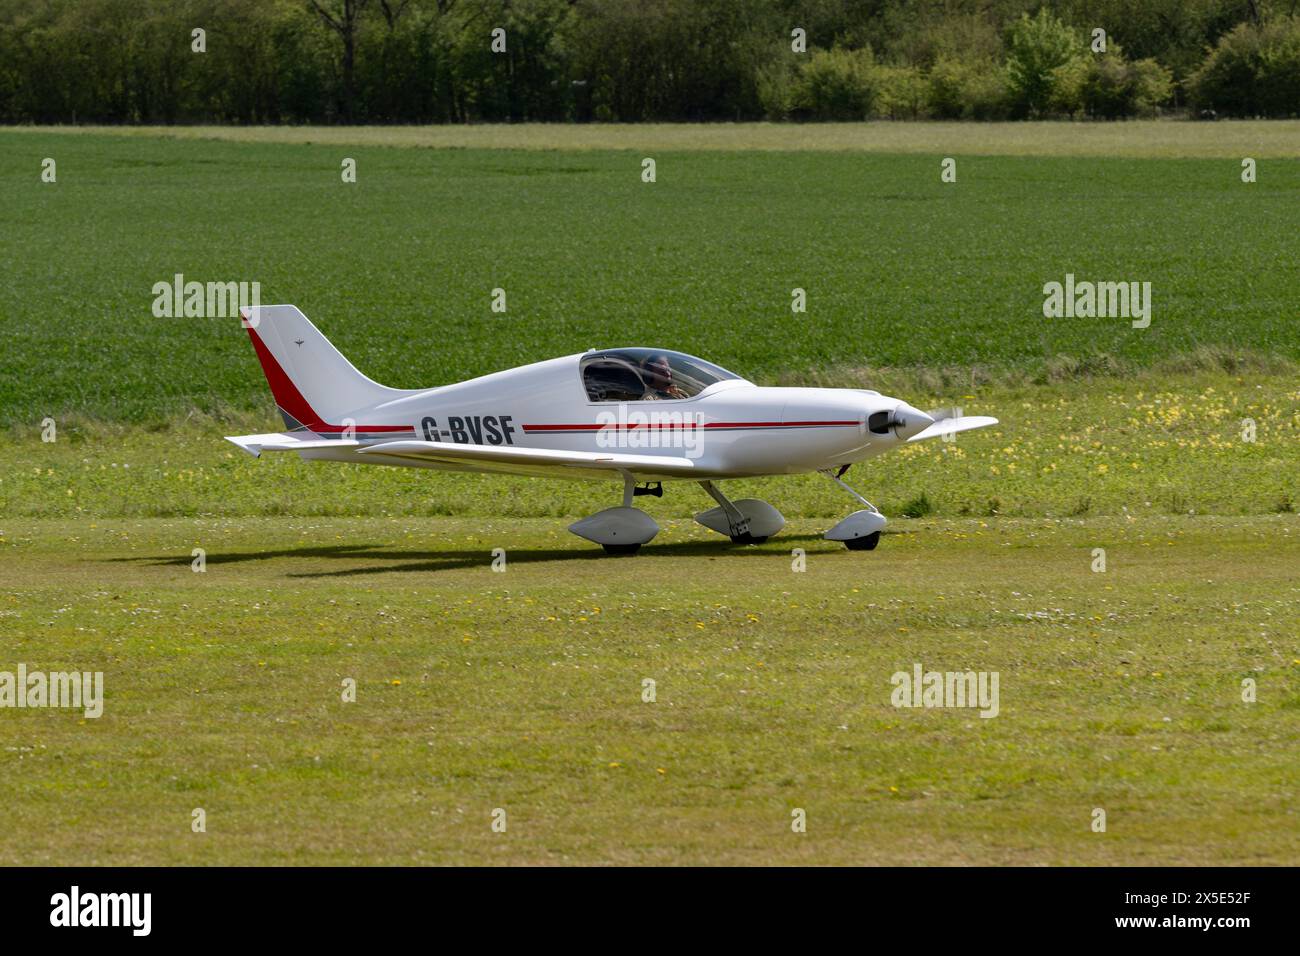 Very clean looking Aero Designs Pulsar Compsite Built Microlight Aircraft arrives at Popham airfield near Basingstoke in Hampshire for the Fly In Stock Photo